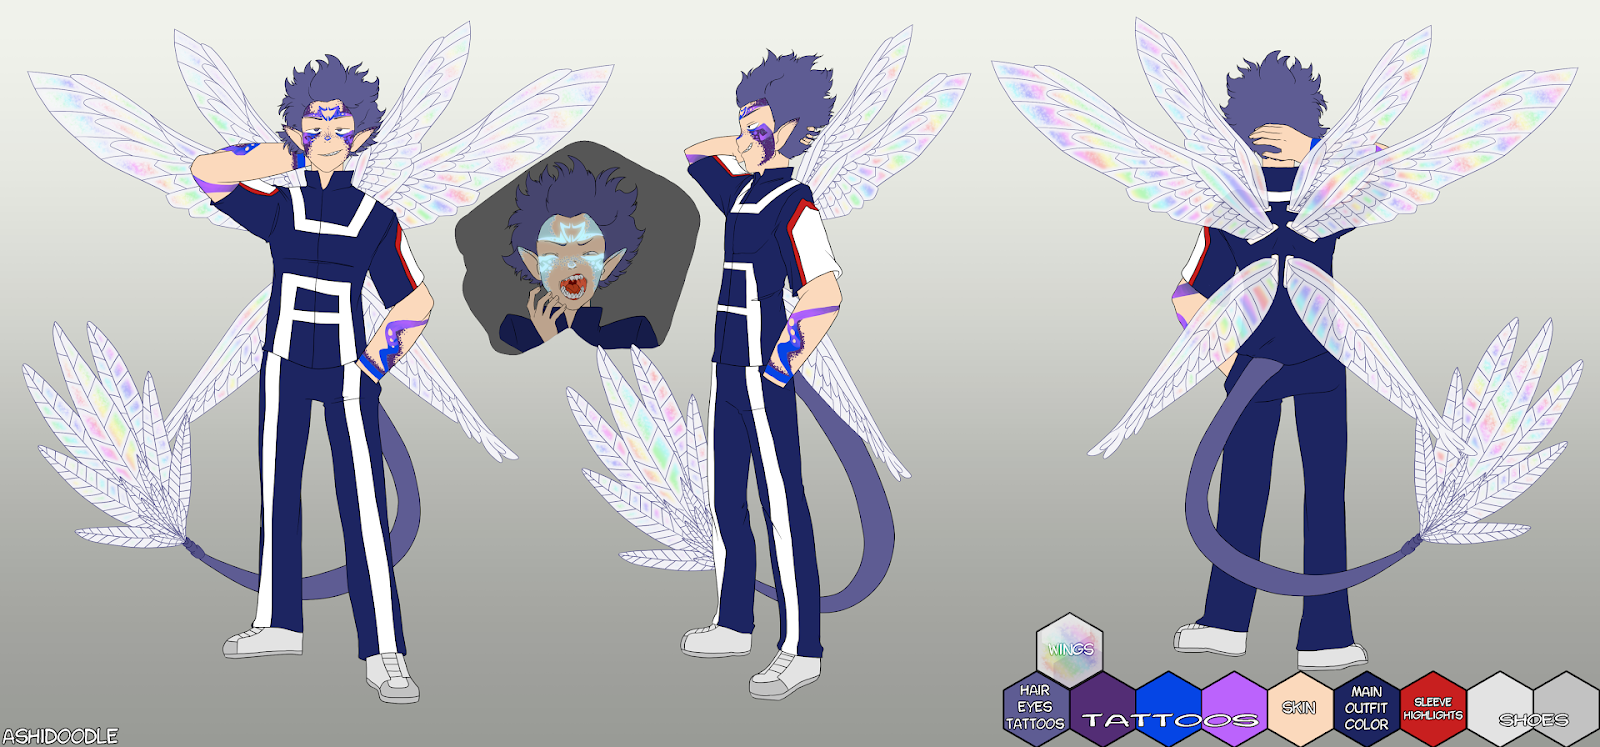 A character design sheet showing Hitoshi's new form including a long tail and irridescent dragonfly-esque wings. His arms, cheeks, and forhead have tattoo patterns that are primarily purple but have shades of blue within them. His ears are pointed and a portion of the sheet shows Hitoshi's tattoos glowing at night.